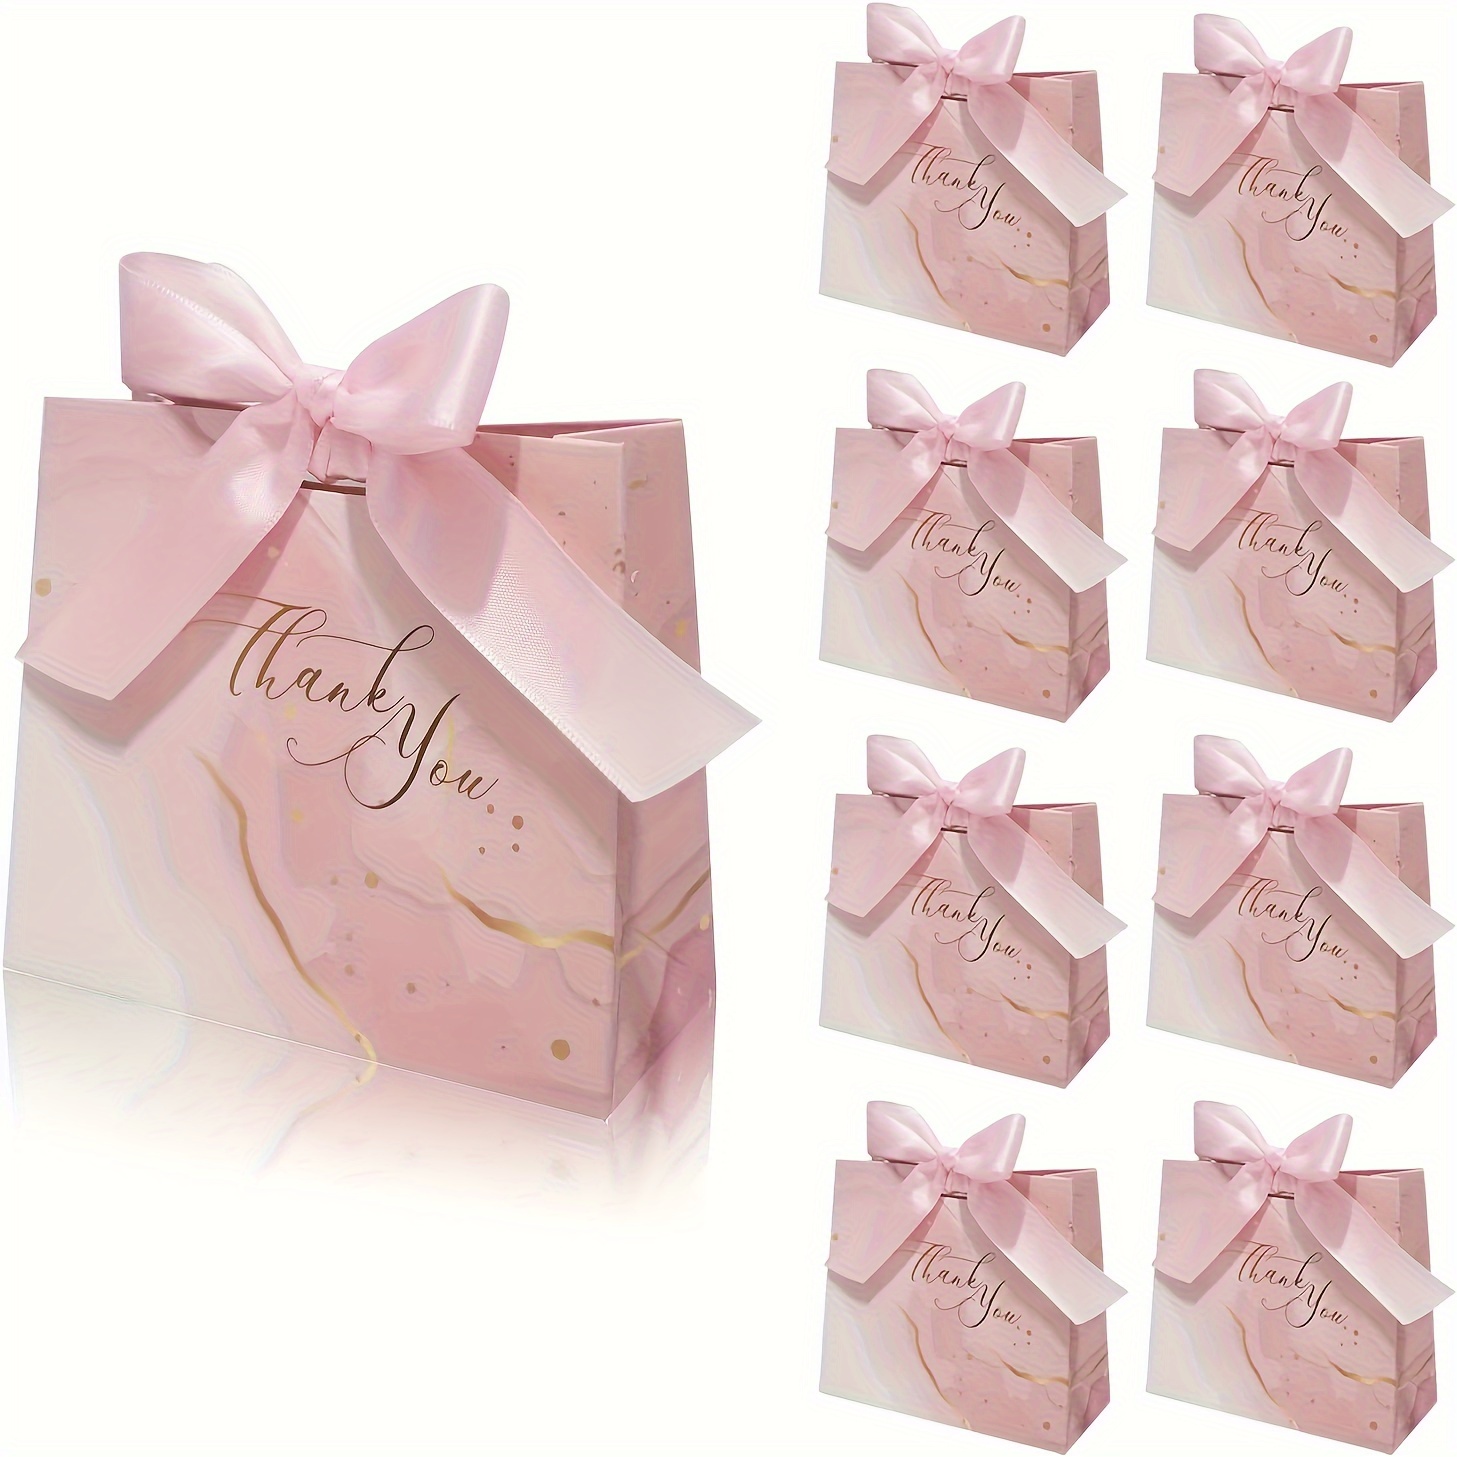 

30pack Small Thank You Gift Bags, Marble Pattern Party Favor Pink Bags With Pink Bow Ribbon, 4.5x1.8x3.9inches, Paper Bags For Birthday Wedding Bridesmaid Holiday Valentines Day